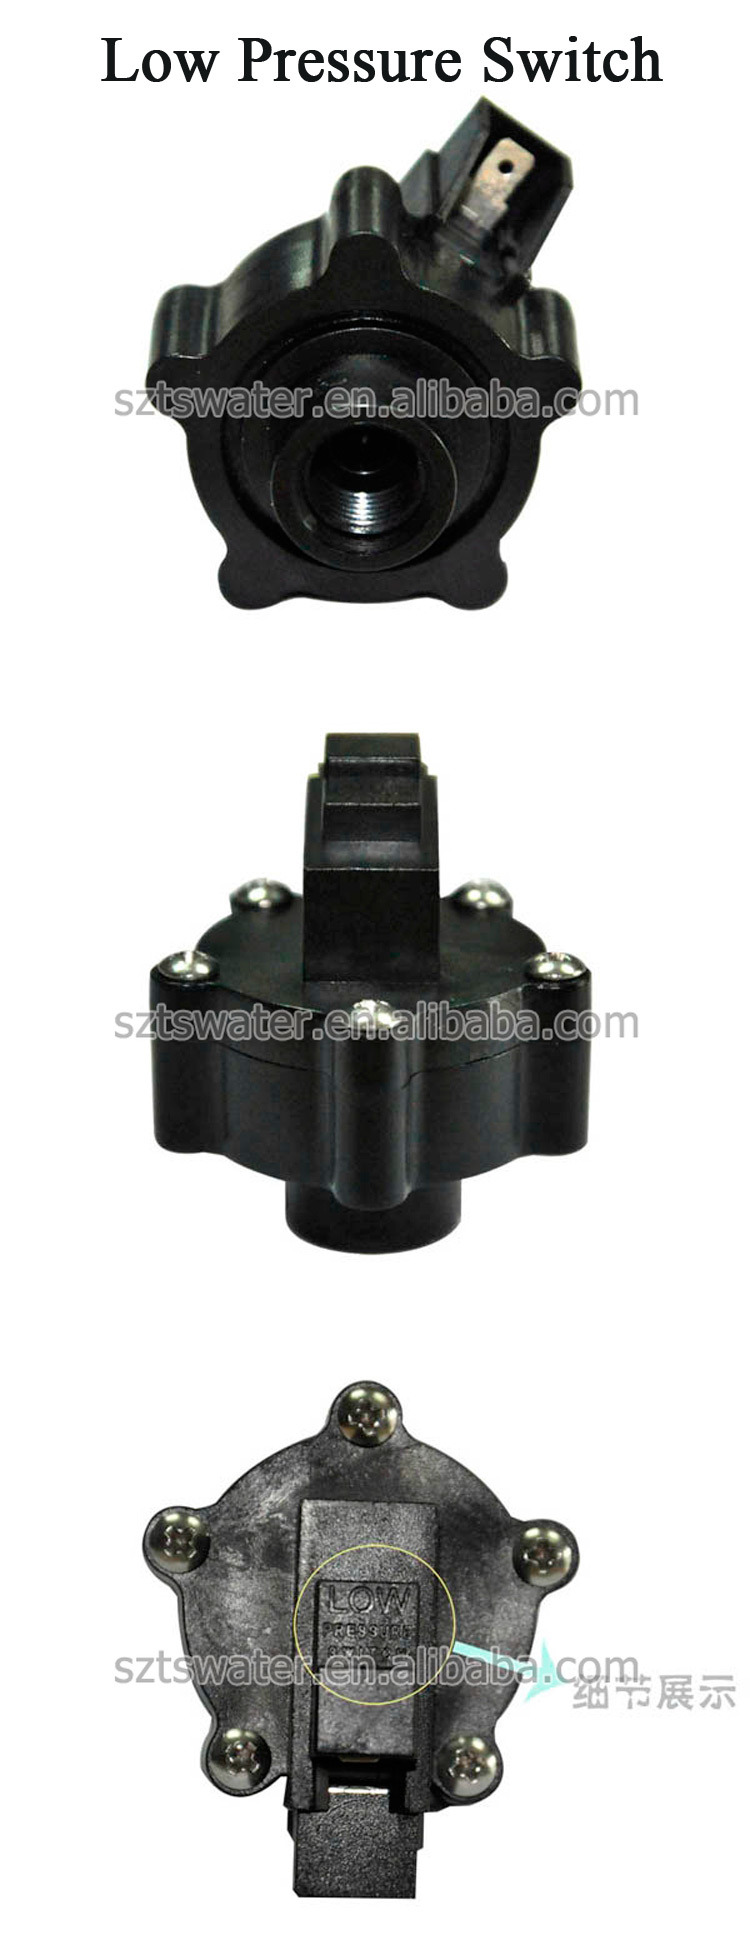 High Pressure Switch for RO Water System